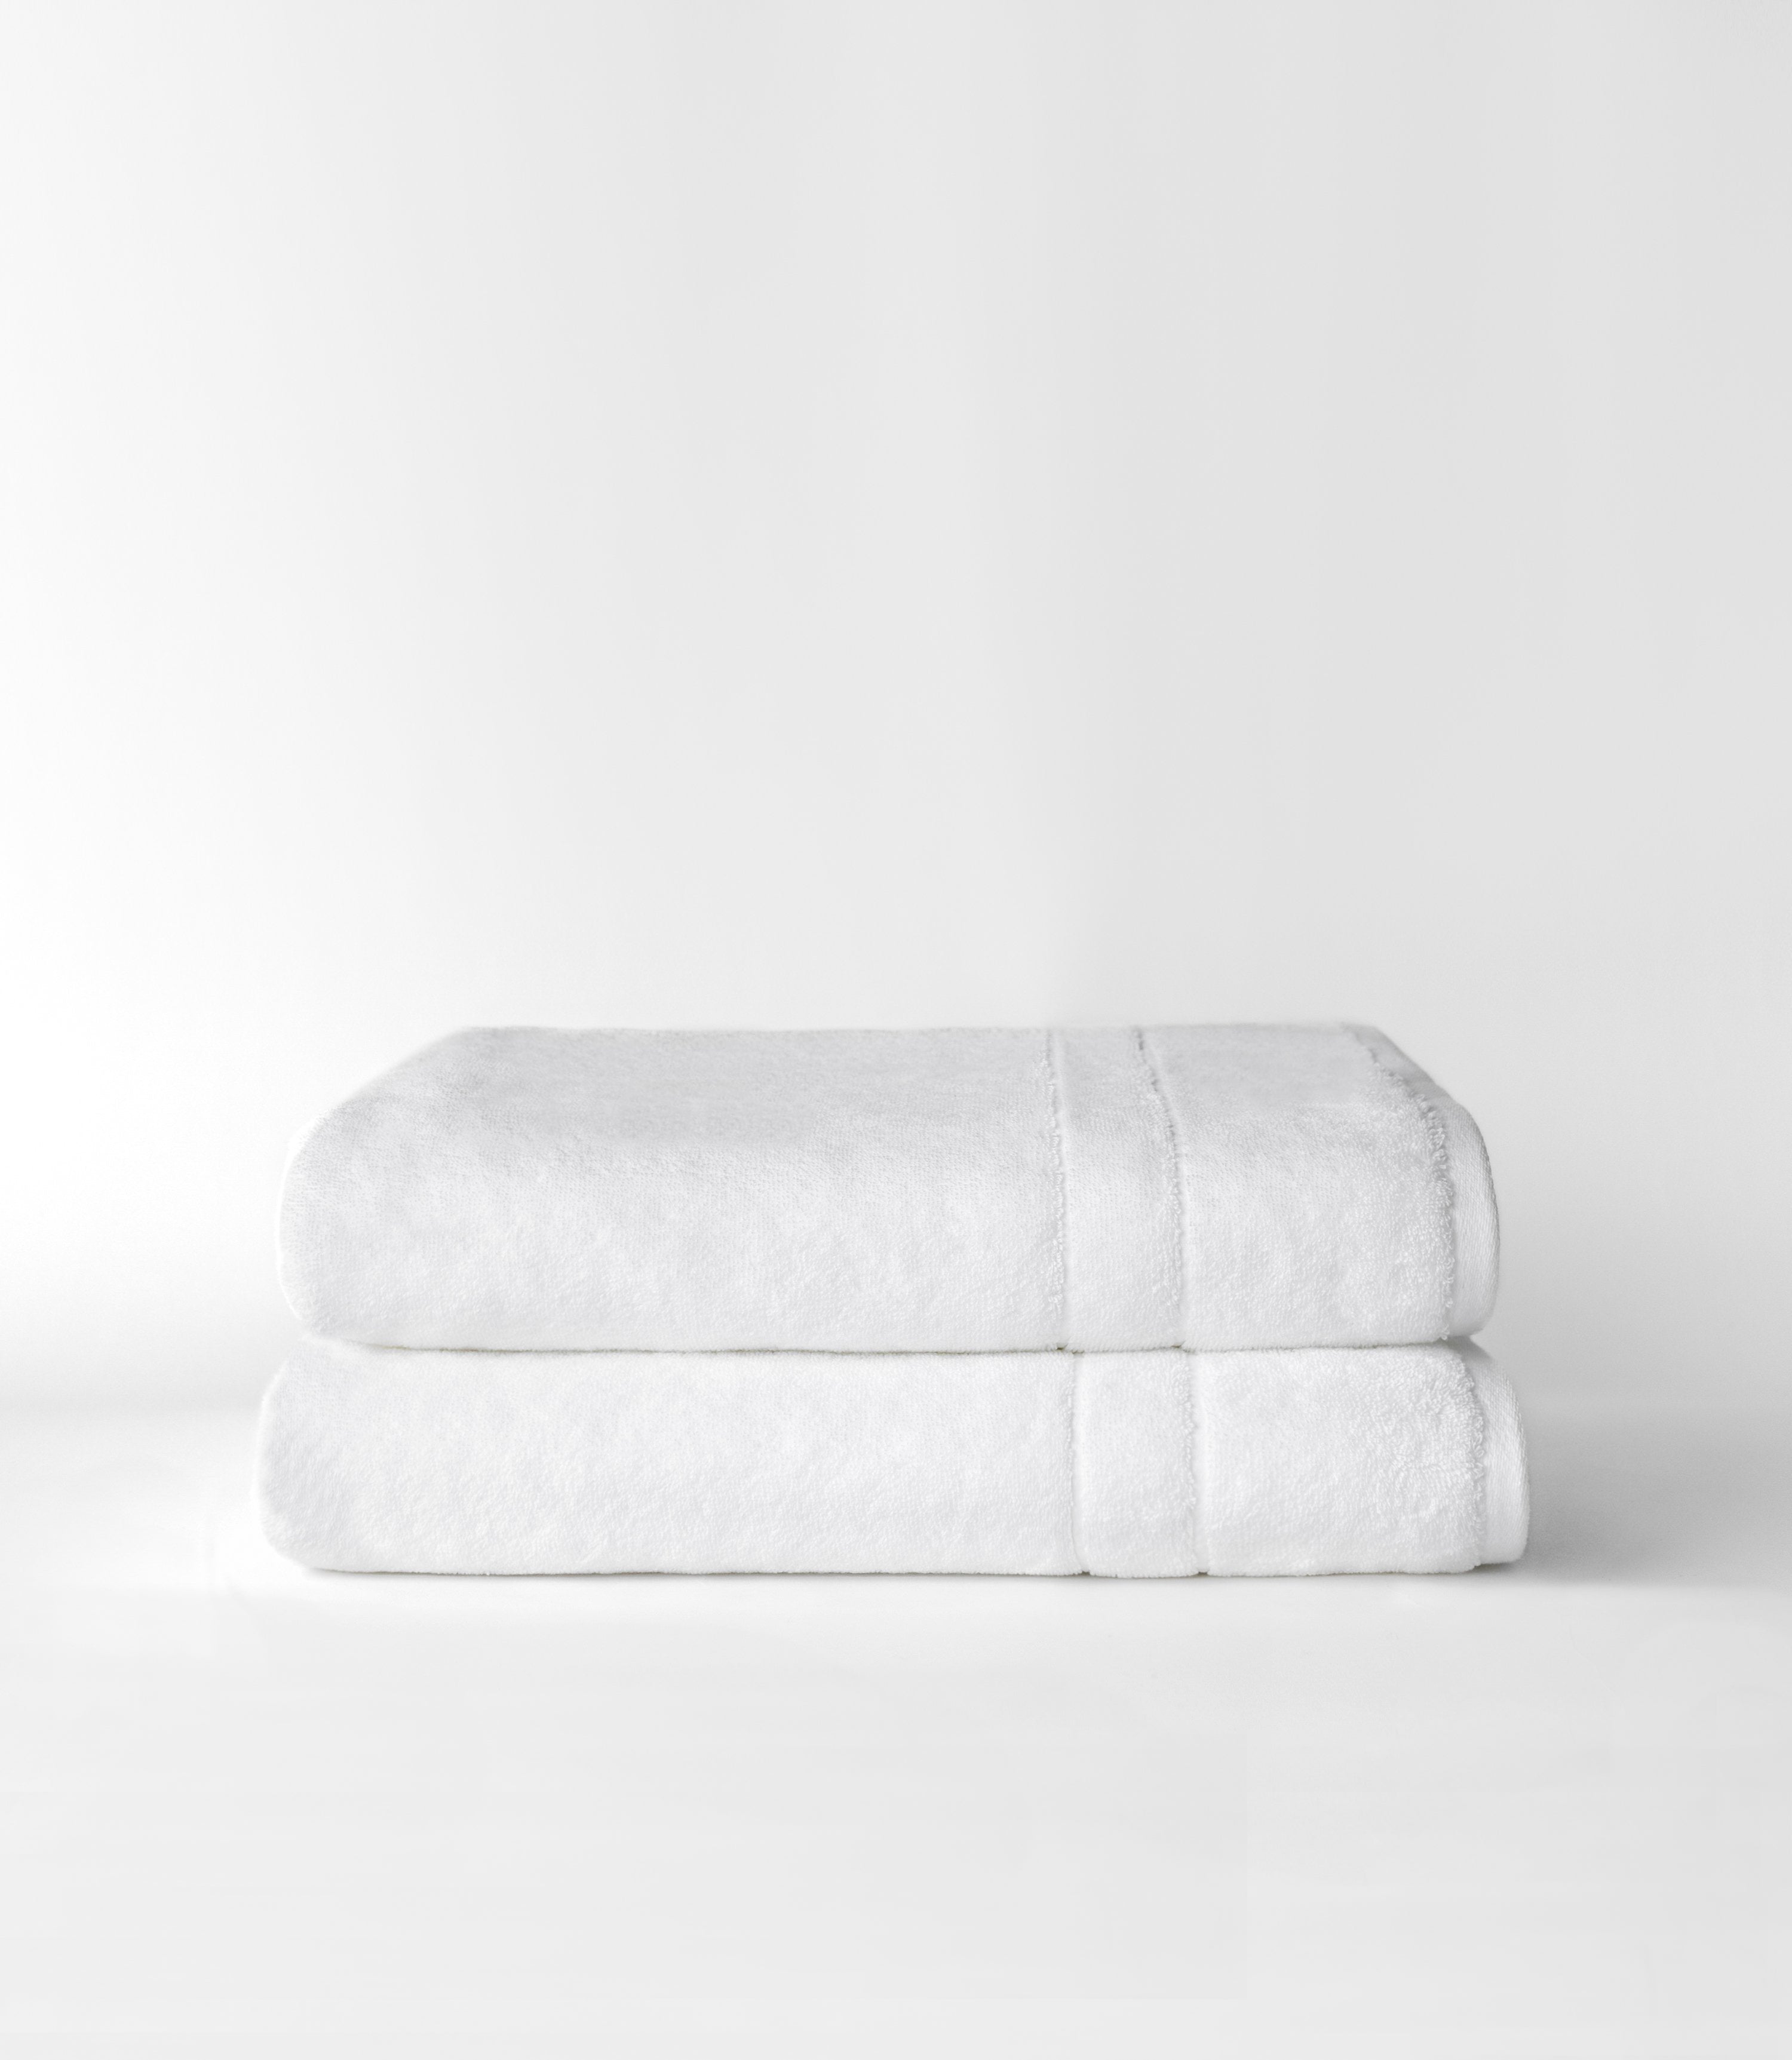 Premium Plush Bath Sheets in the color white. Photo of bath sheets taken with white background |Color:White